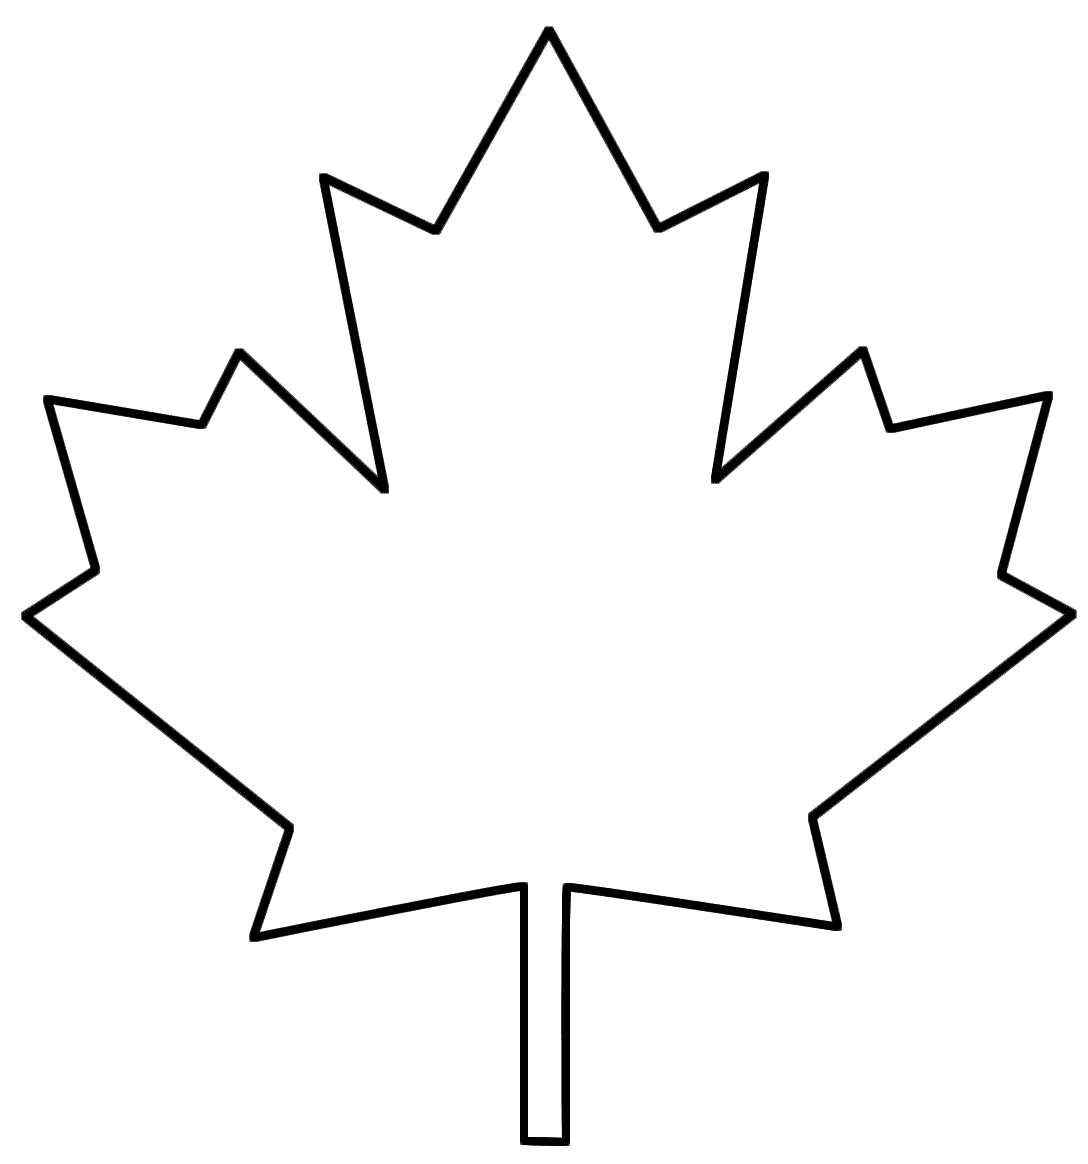 Maple Leaf Black And White Clipart